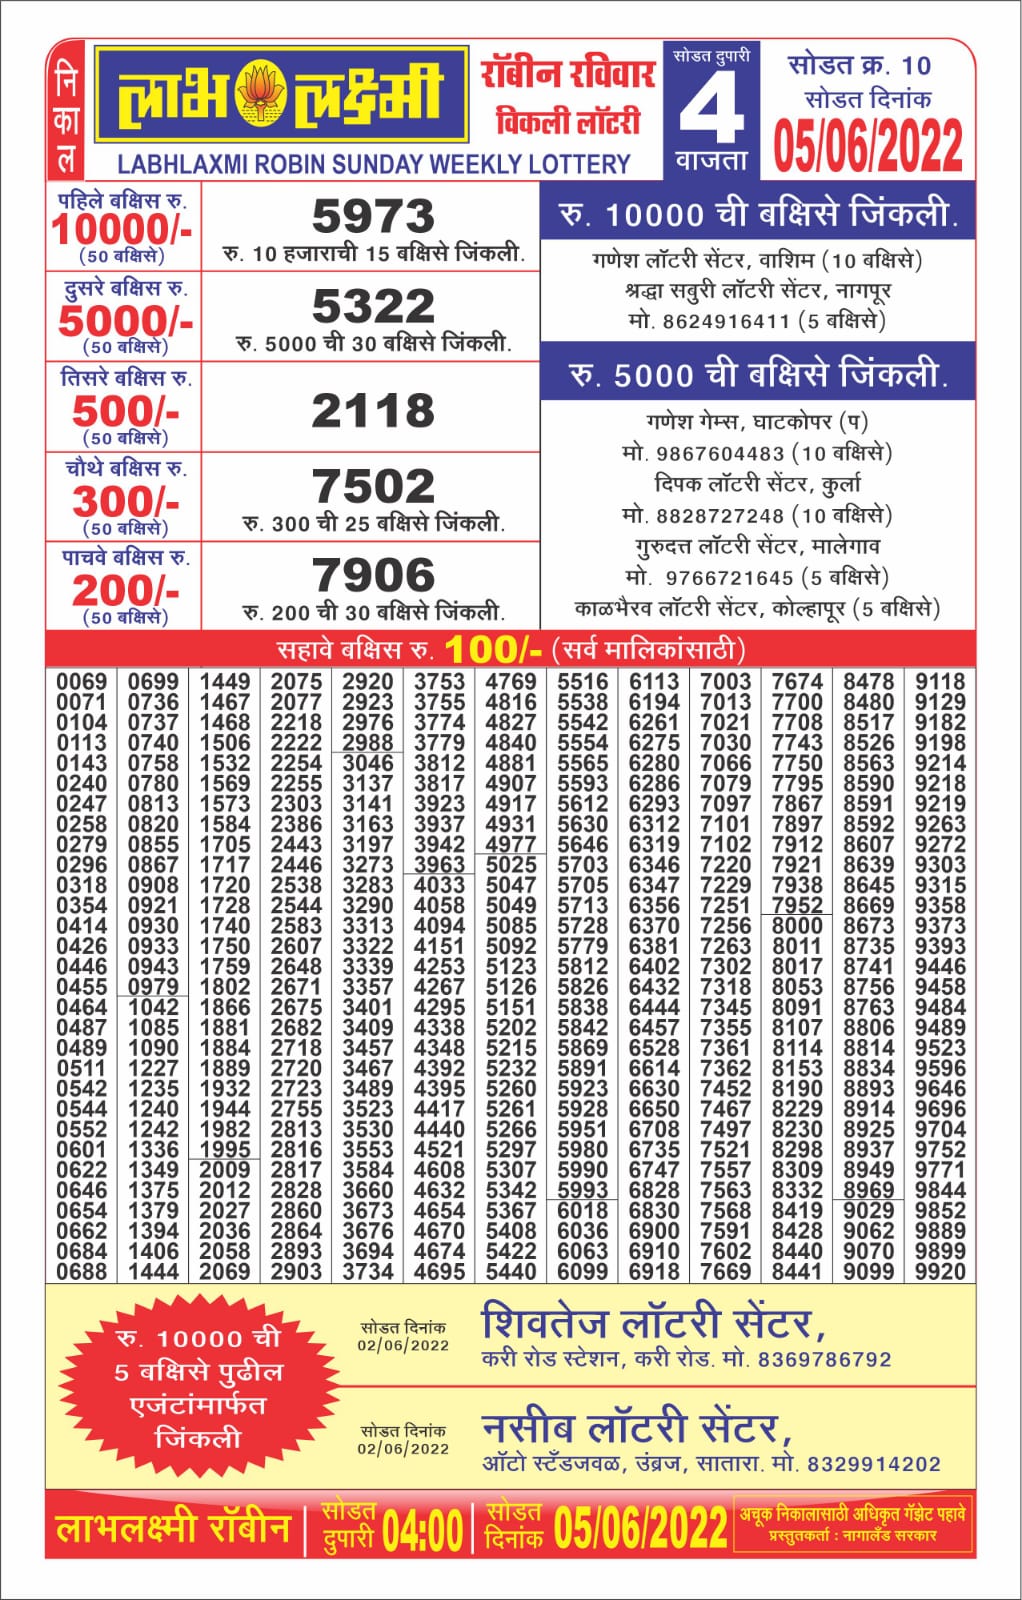 Labhlaxmi 4pm Lottery Result 05.06.2022